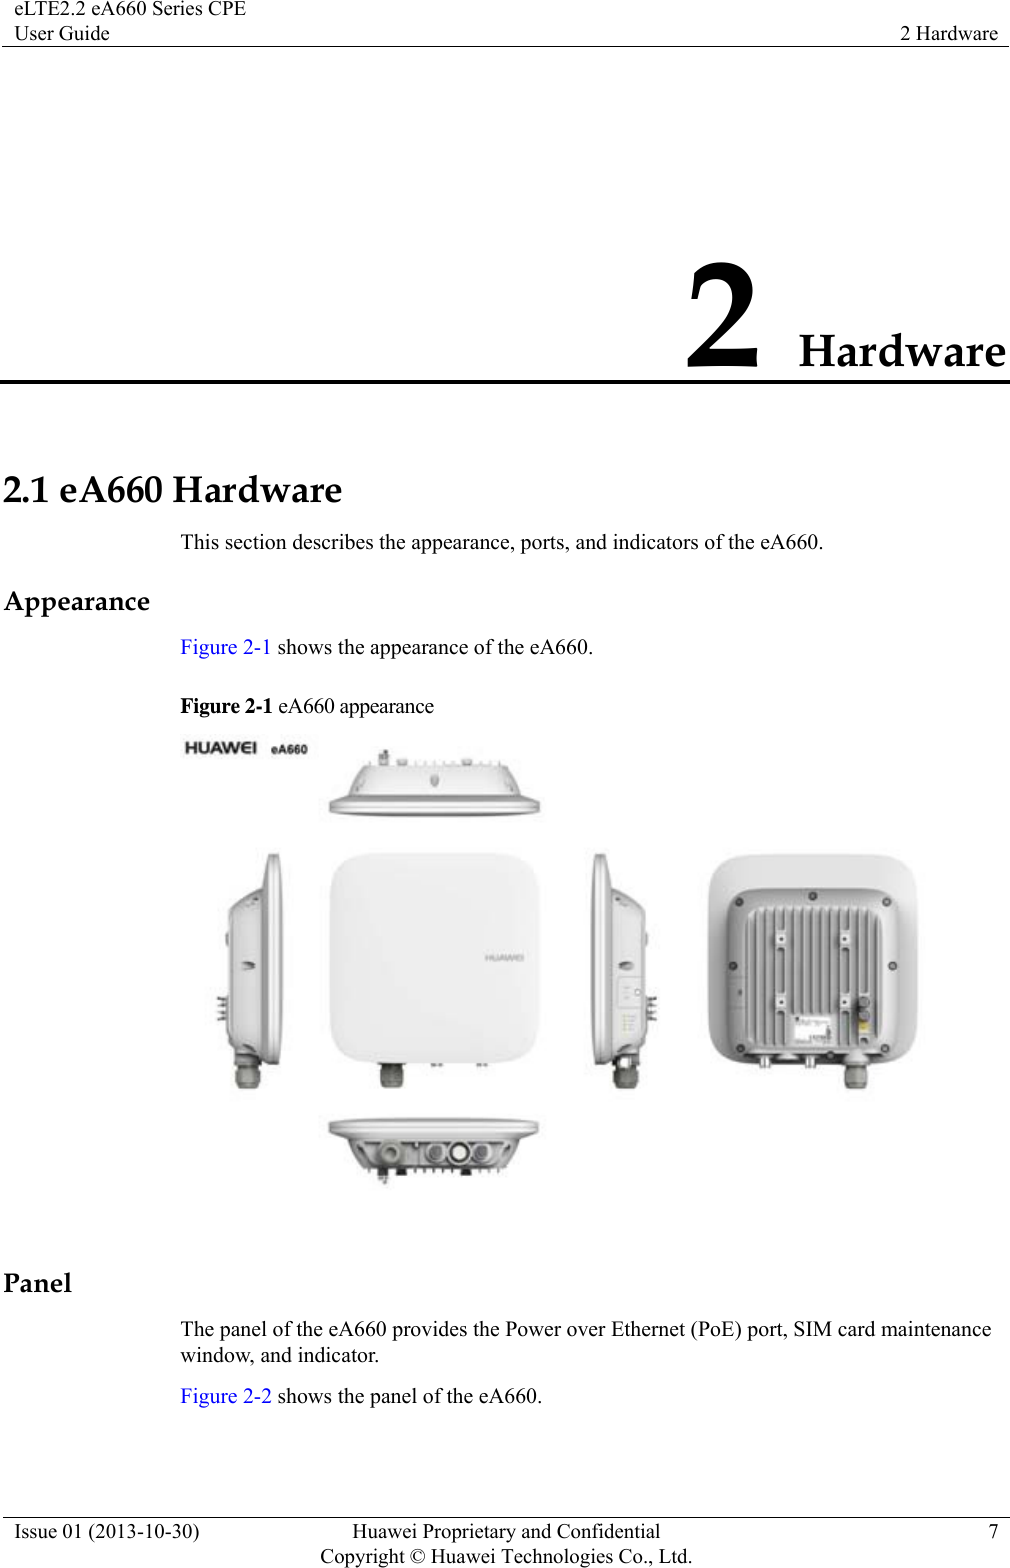 eLTE2.2 eA660 Series CPE User Guide  2 Hardware Issue 01 (2013-10-30)  Huawei Proprietary and Confidential         Copyright © Huawei Technologies Co., Ltd.7 2 Hardware 2.1 eA660 Hardware This section describes the appearance, ports, and indicators of the eA660. Appearance Figure 2-1 shows the appearance of the eA660. Figure 2-1 eA660 appearance   Panel The panel of the eA660 provides the Power over Ethernet (PoE) port, SIM card maintenance window, and indicator. Figure 2-2 shows the panel of the eA660. 